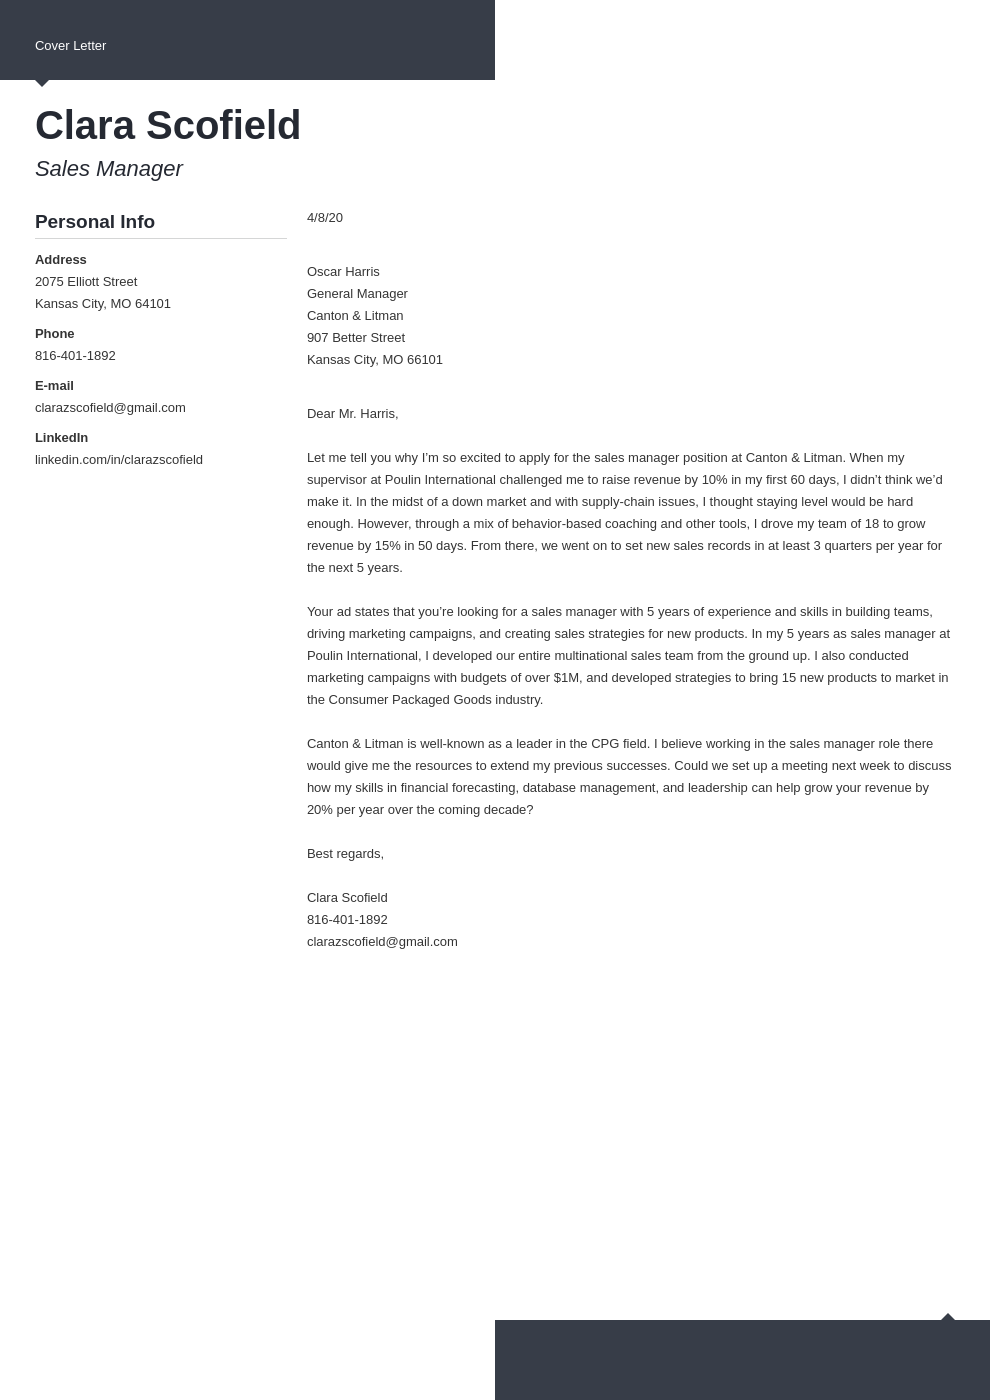 example cover letter for sales management job